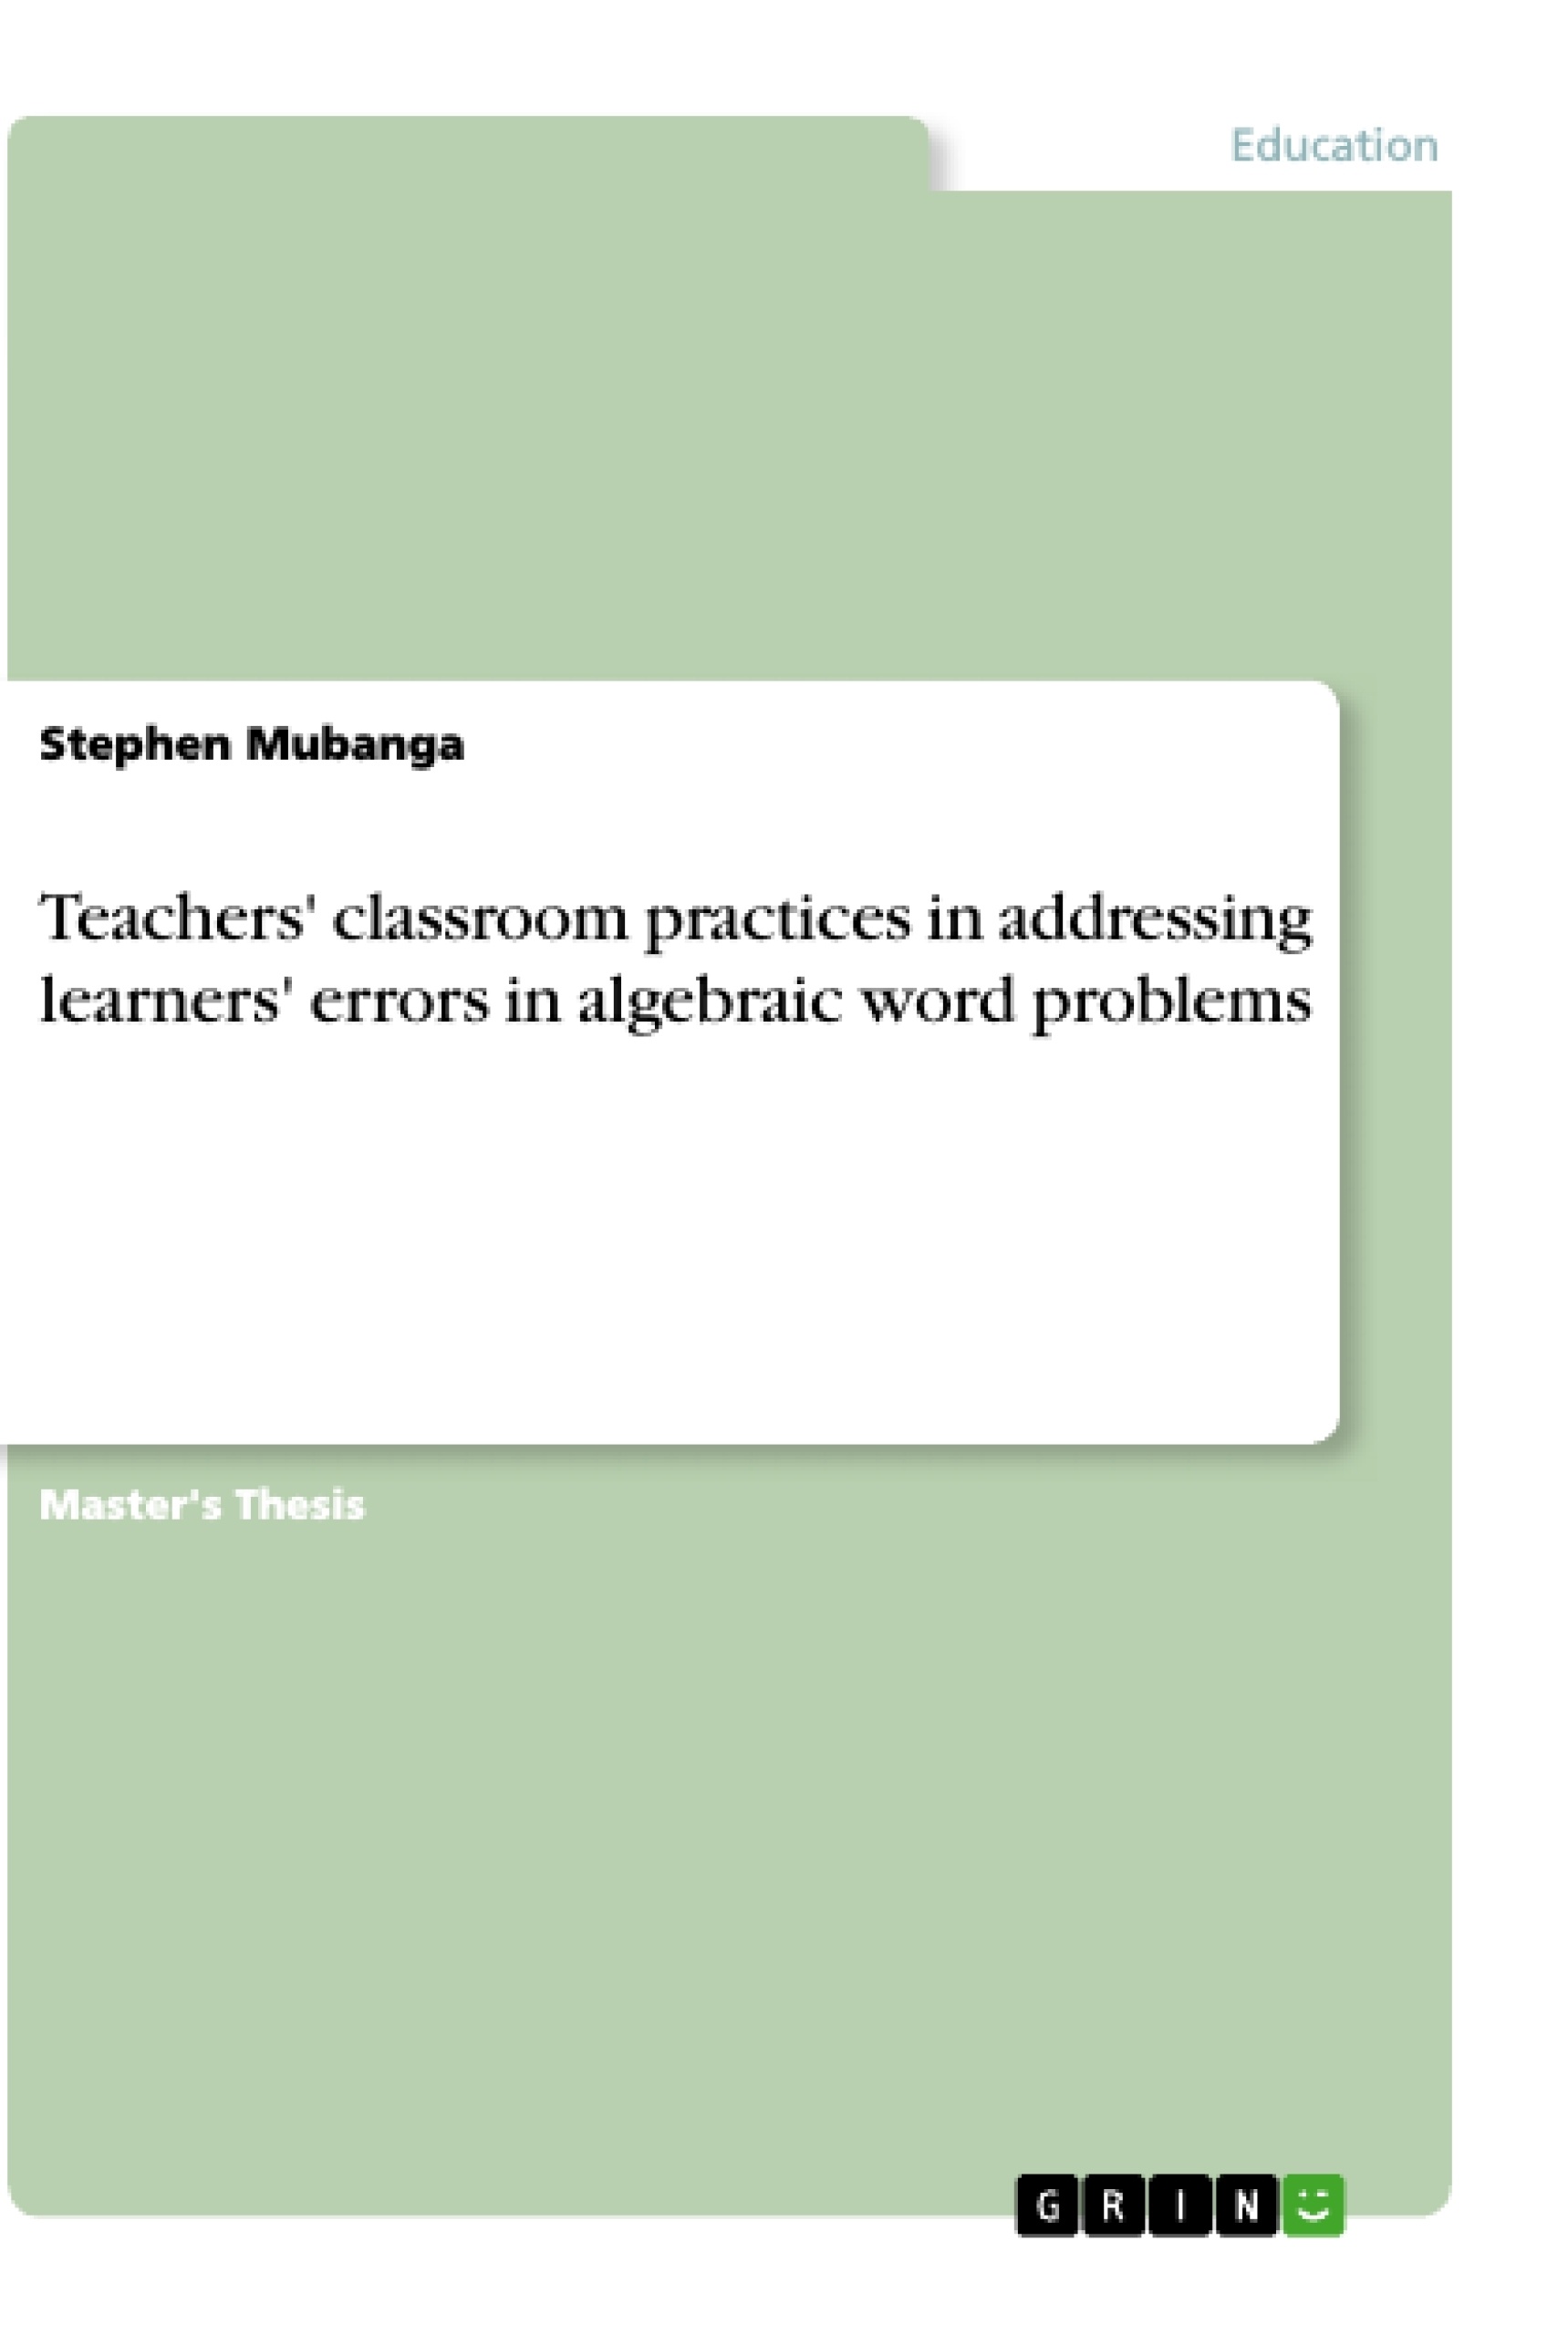 Title: Teachers' classroom practices in addressing learners' errors in algebraic word problems